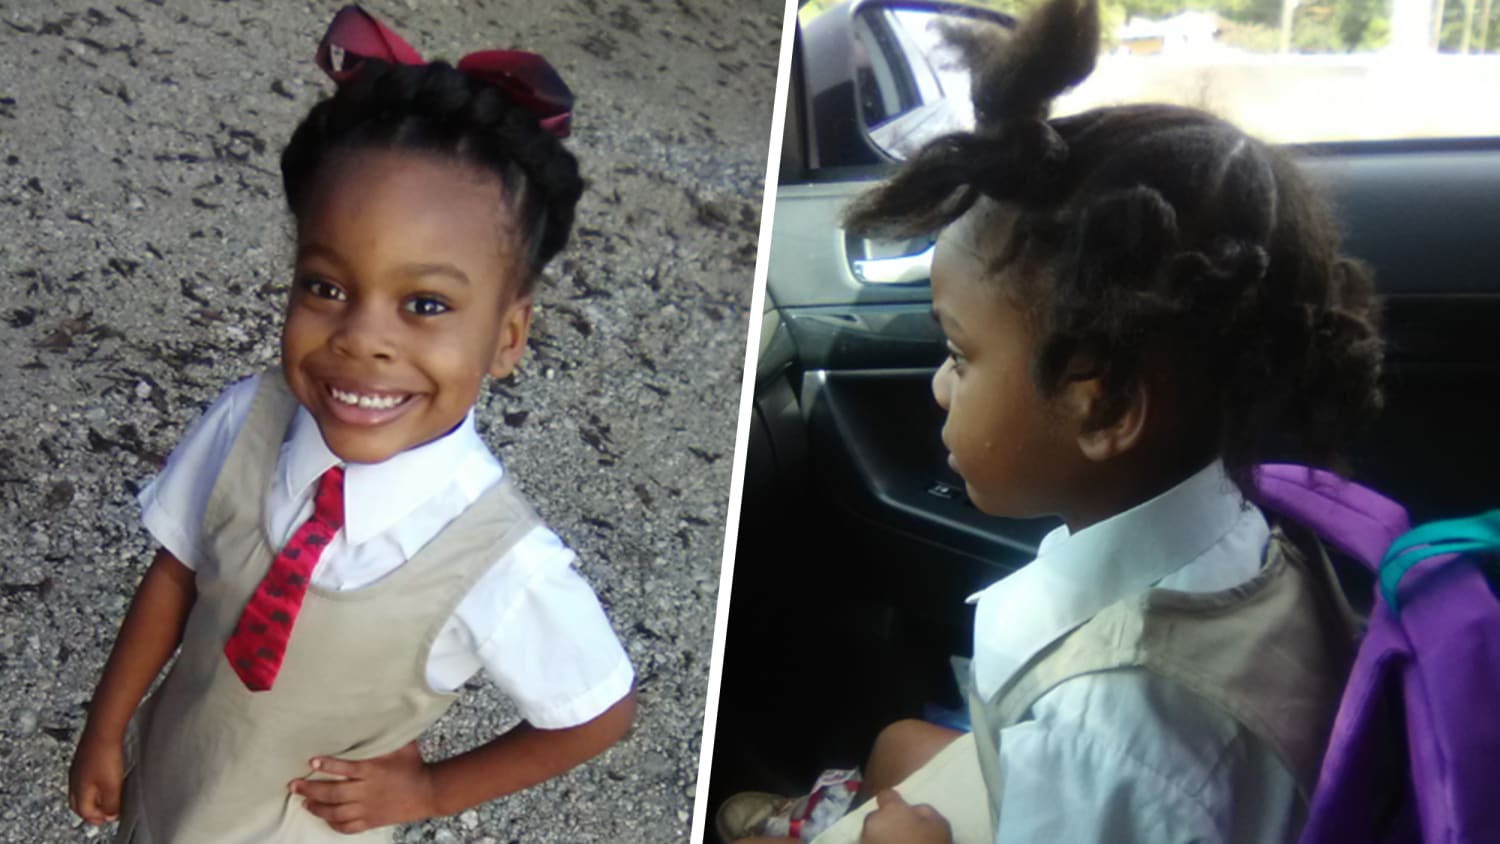 This 5-year-old's hair redo on her first day of school resonates with us all